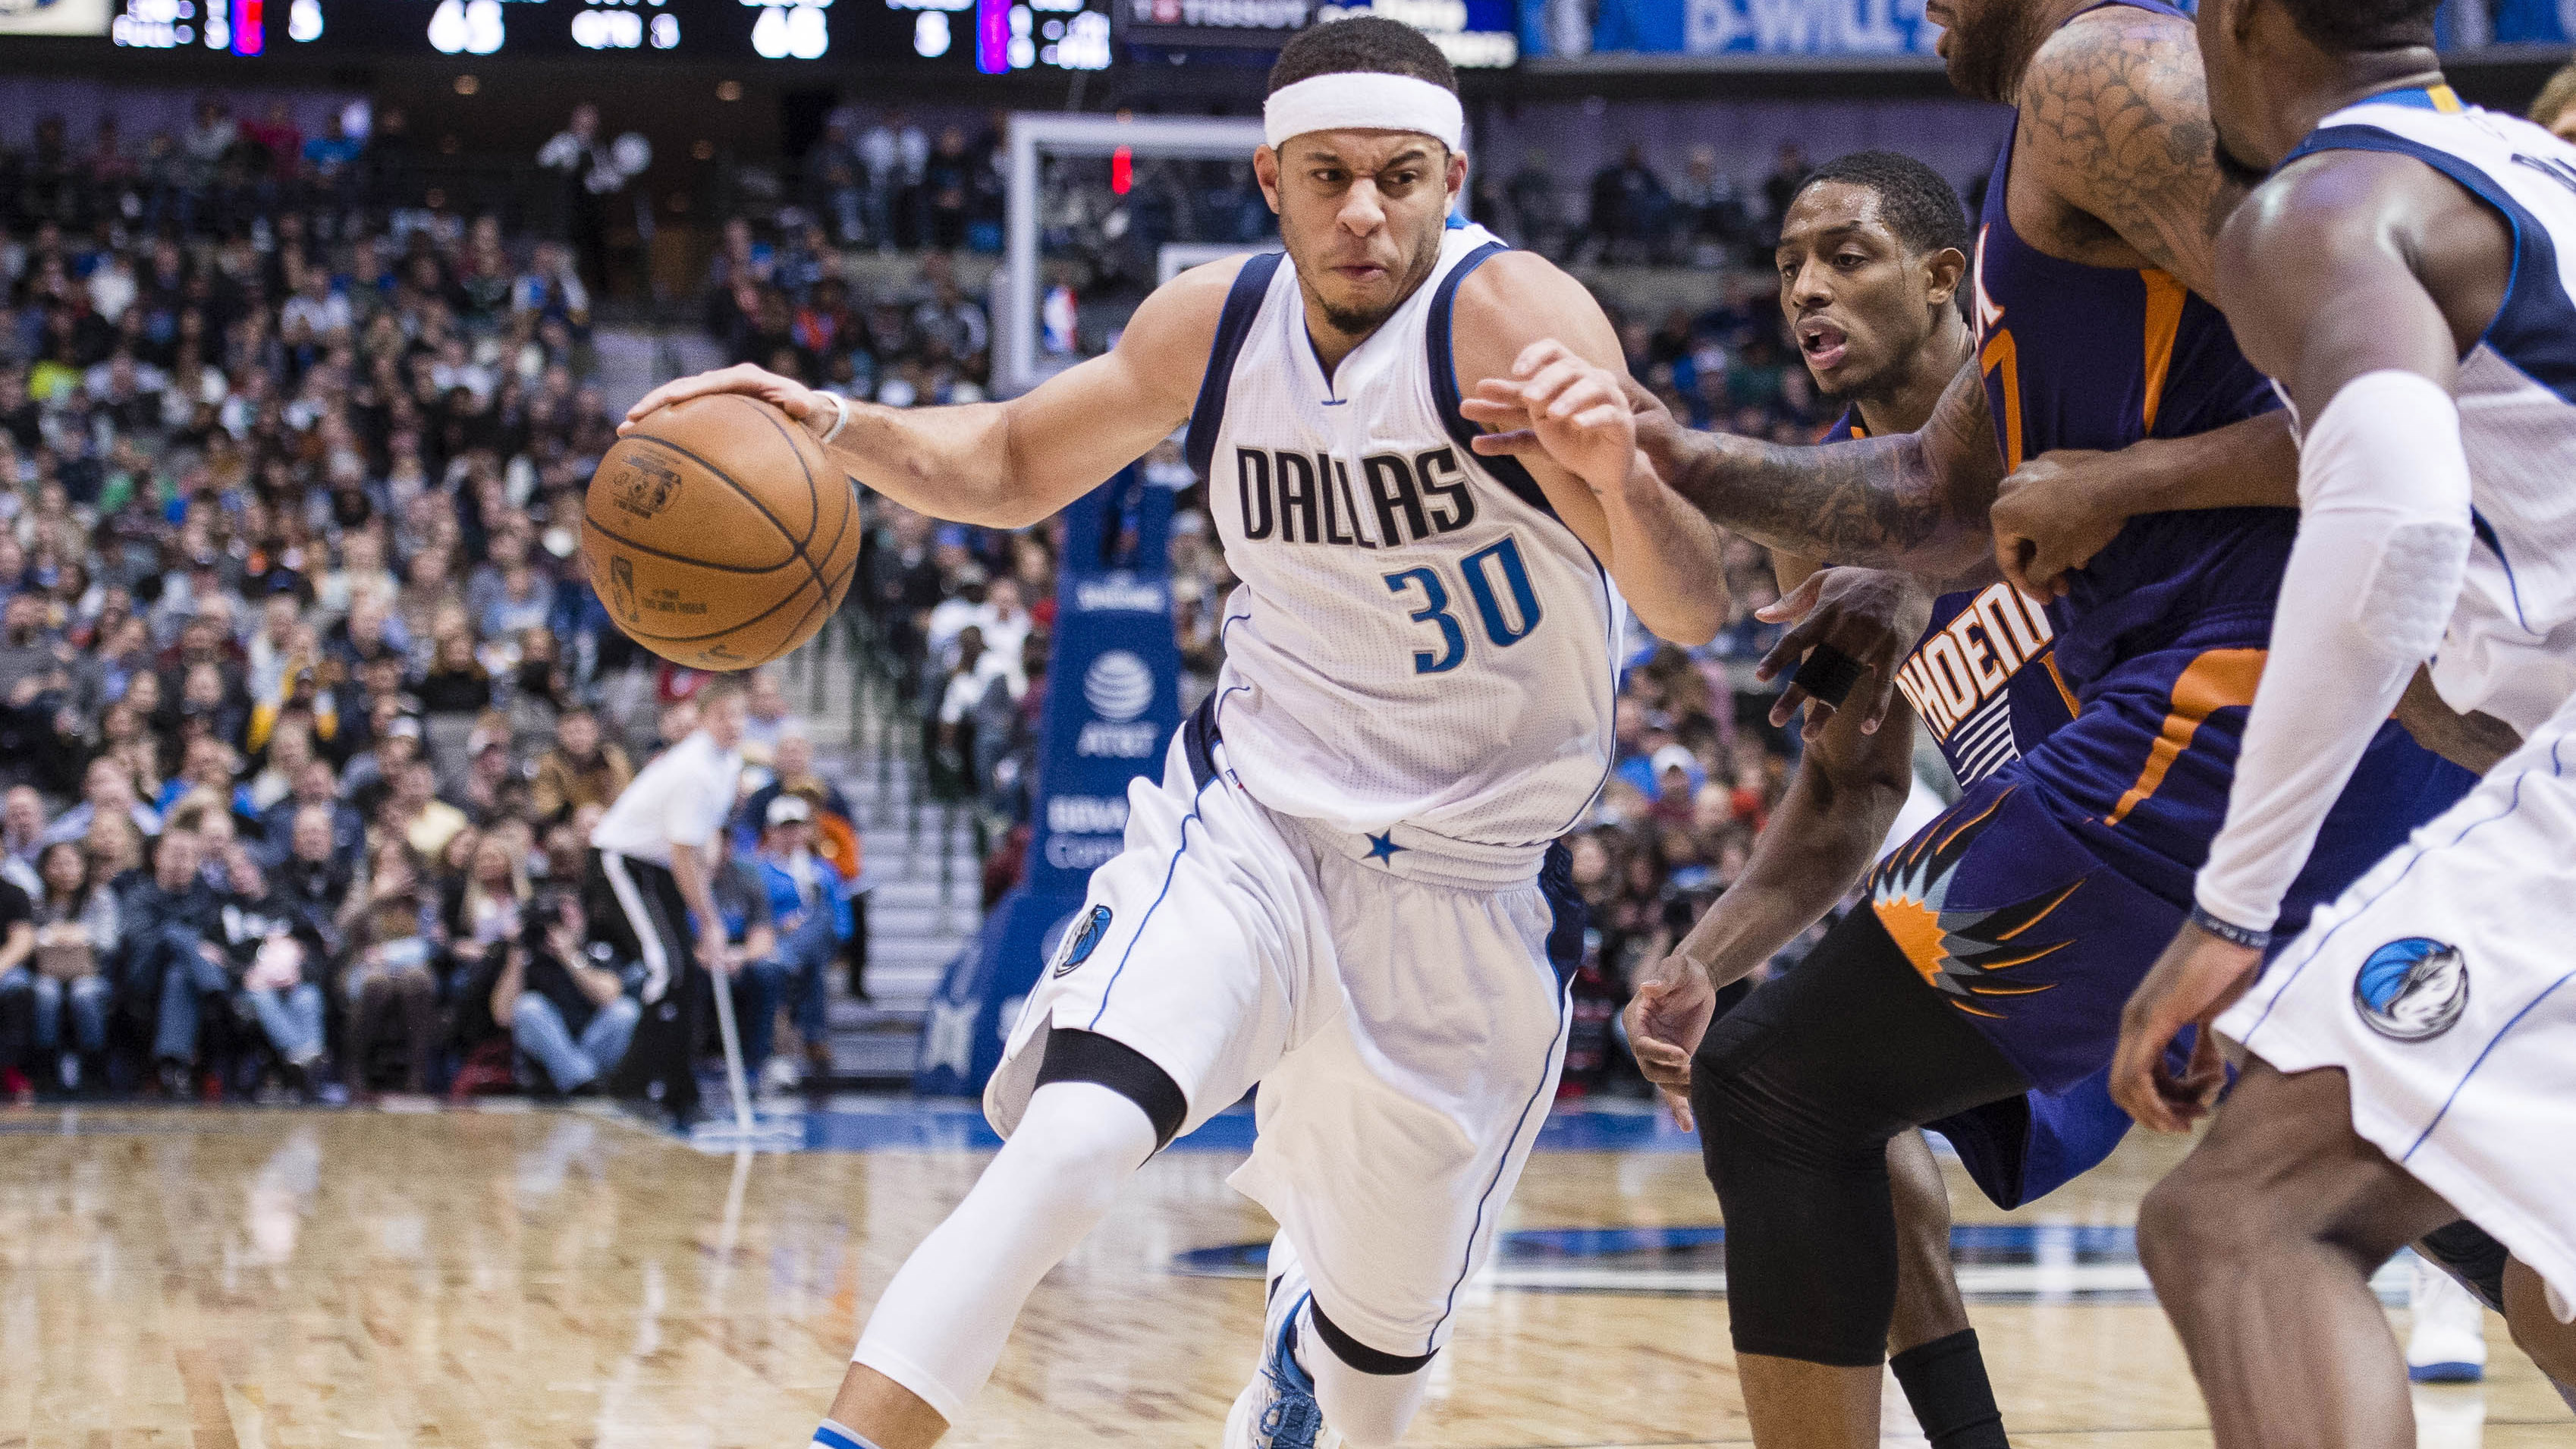 WATCH: Mavs guard Seth Curry showcases his 3-point skills in